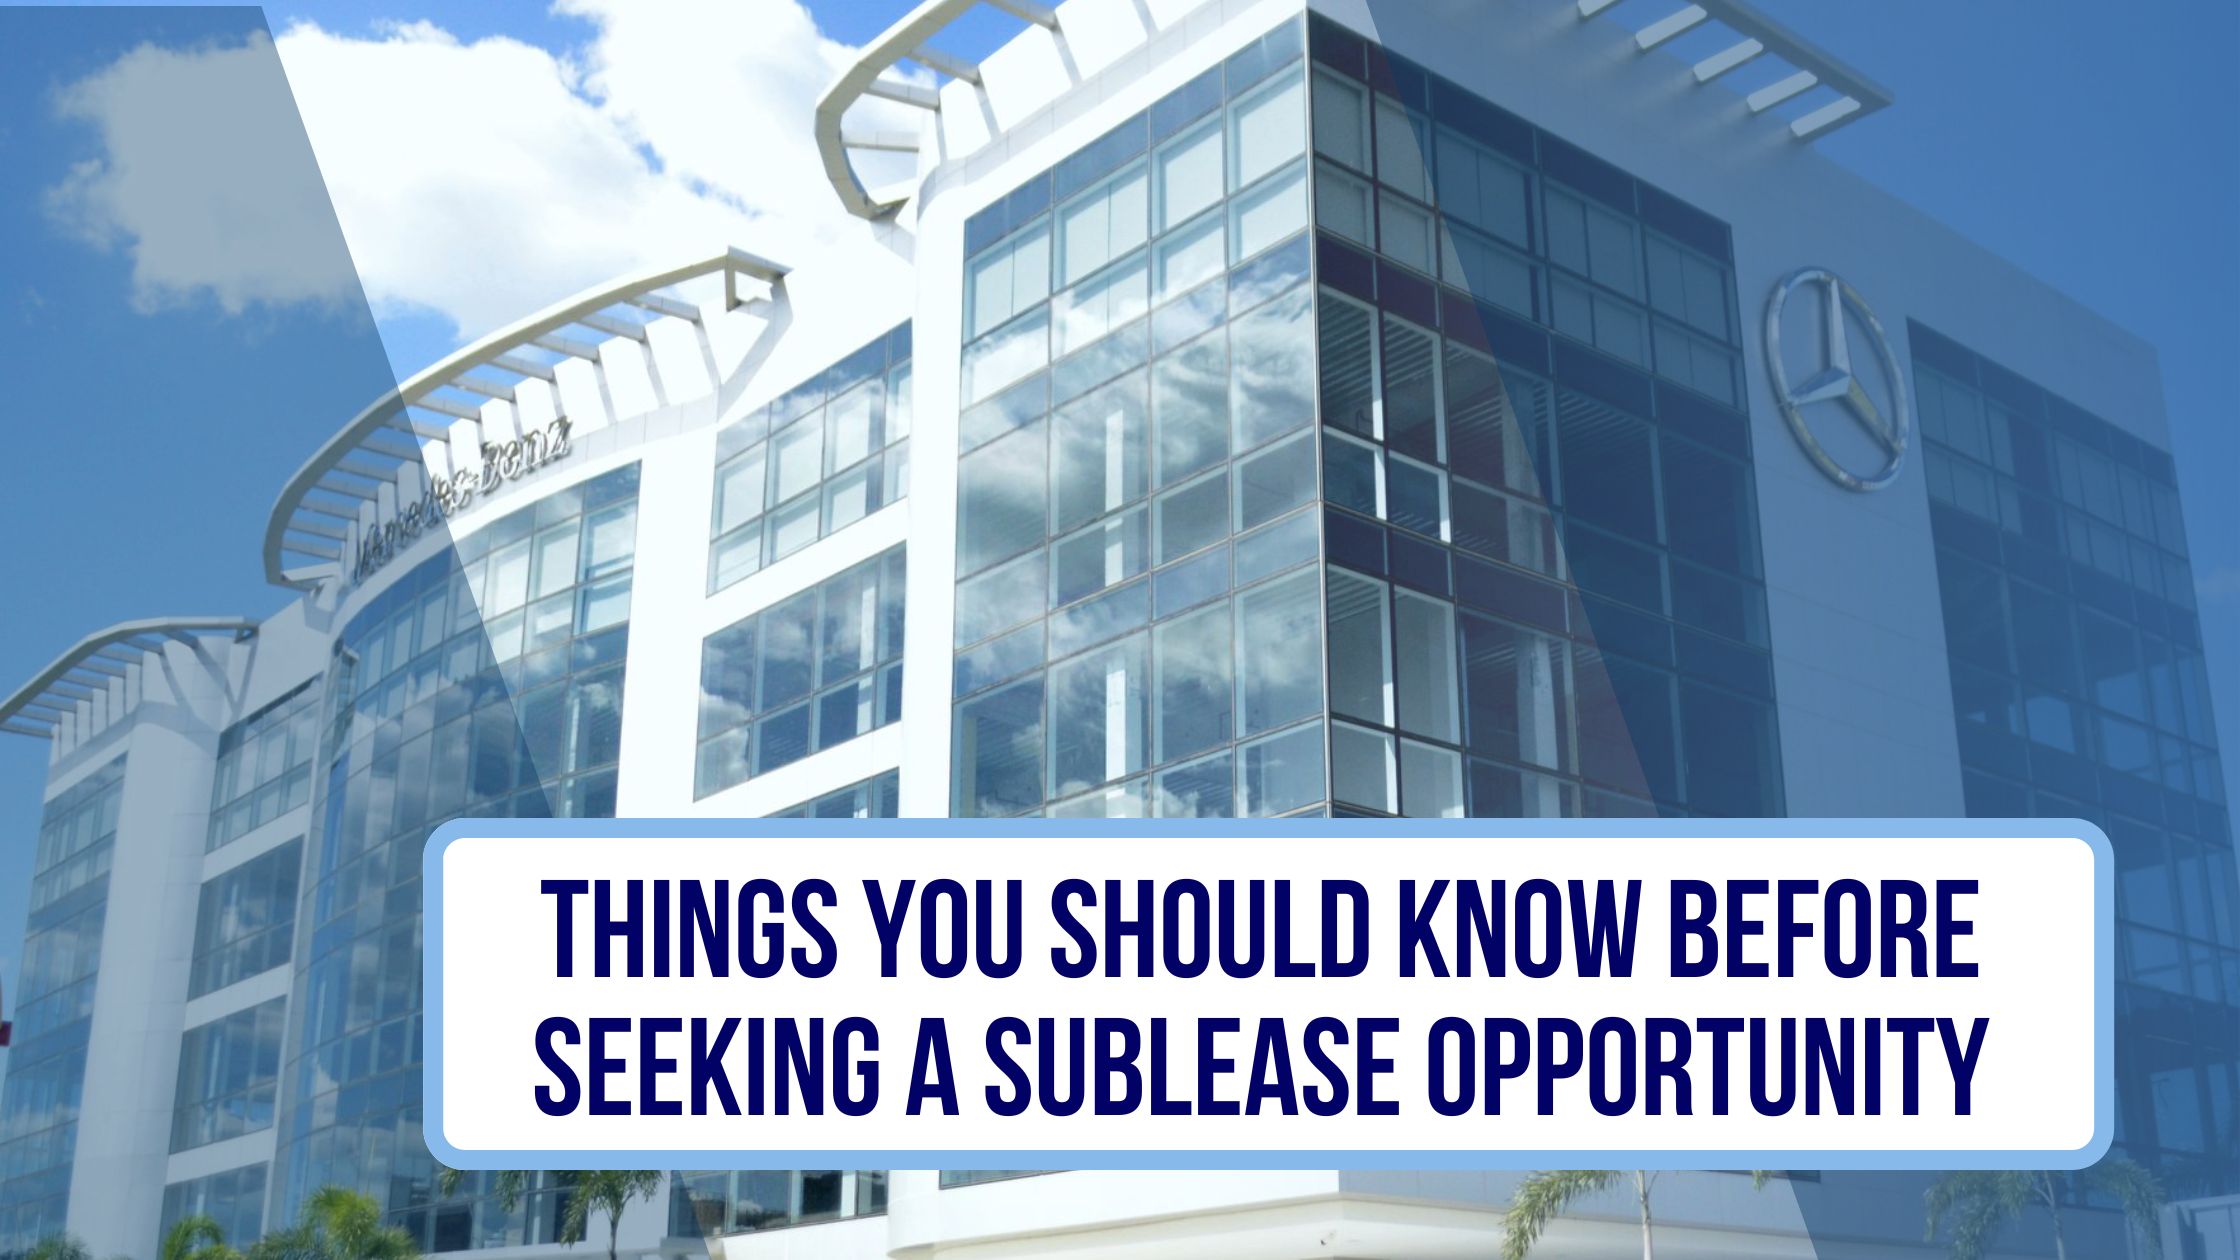 Things you Should Know Before Seeking a Sublease Opportunity